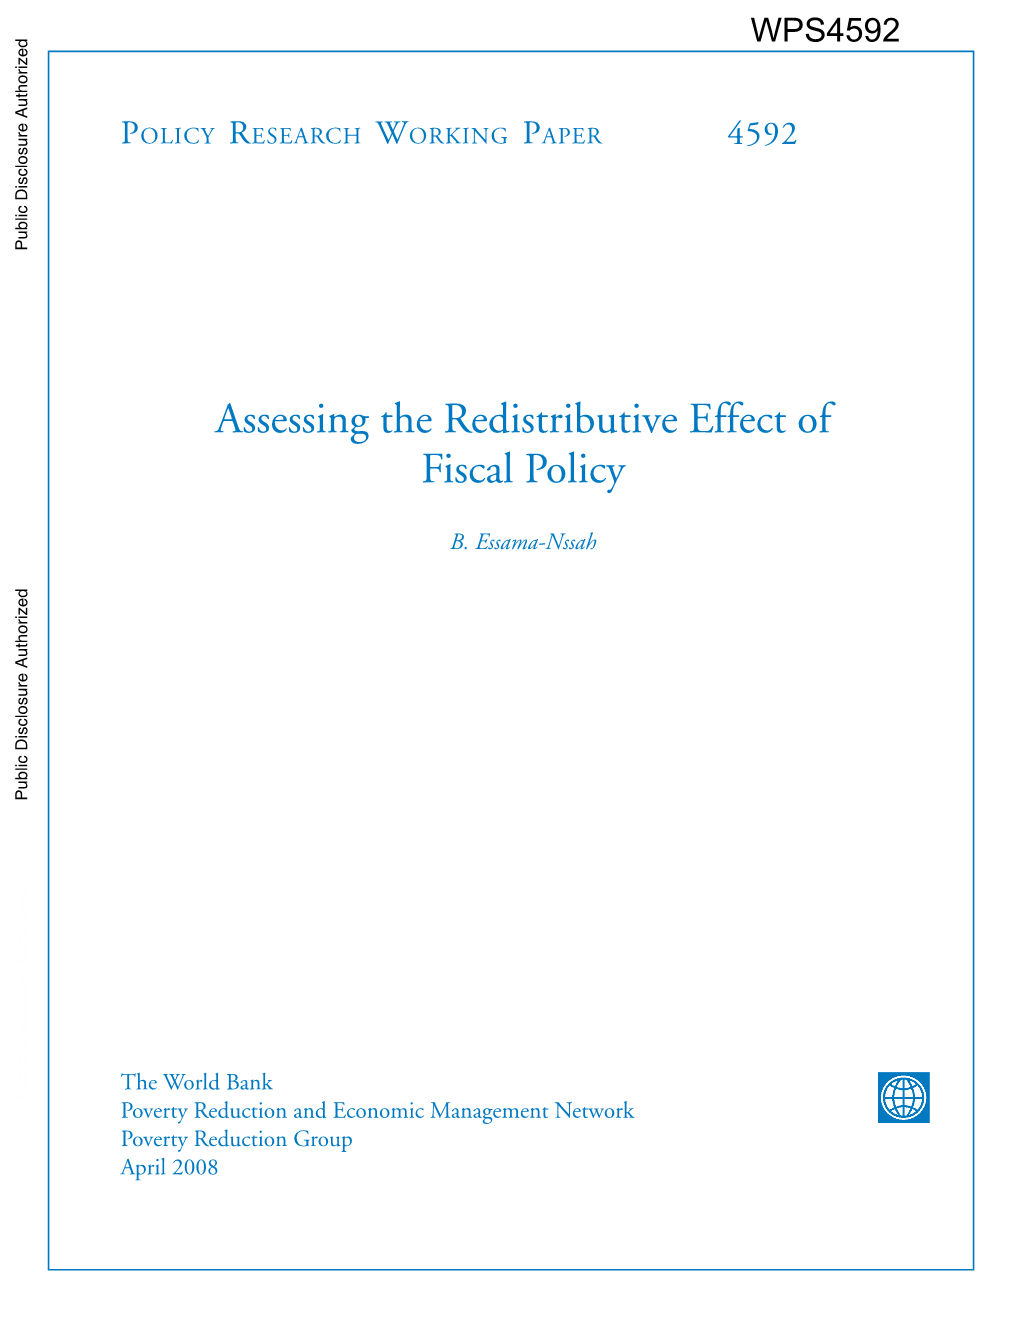 Assessing the Redistributive Effect of Fiscal Policy